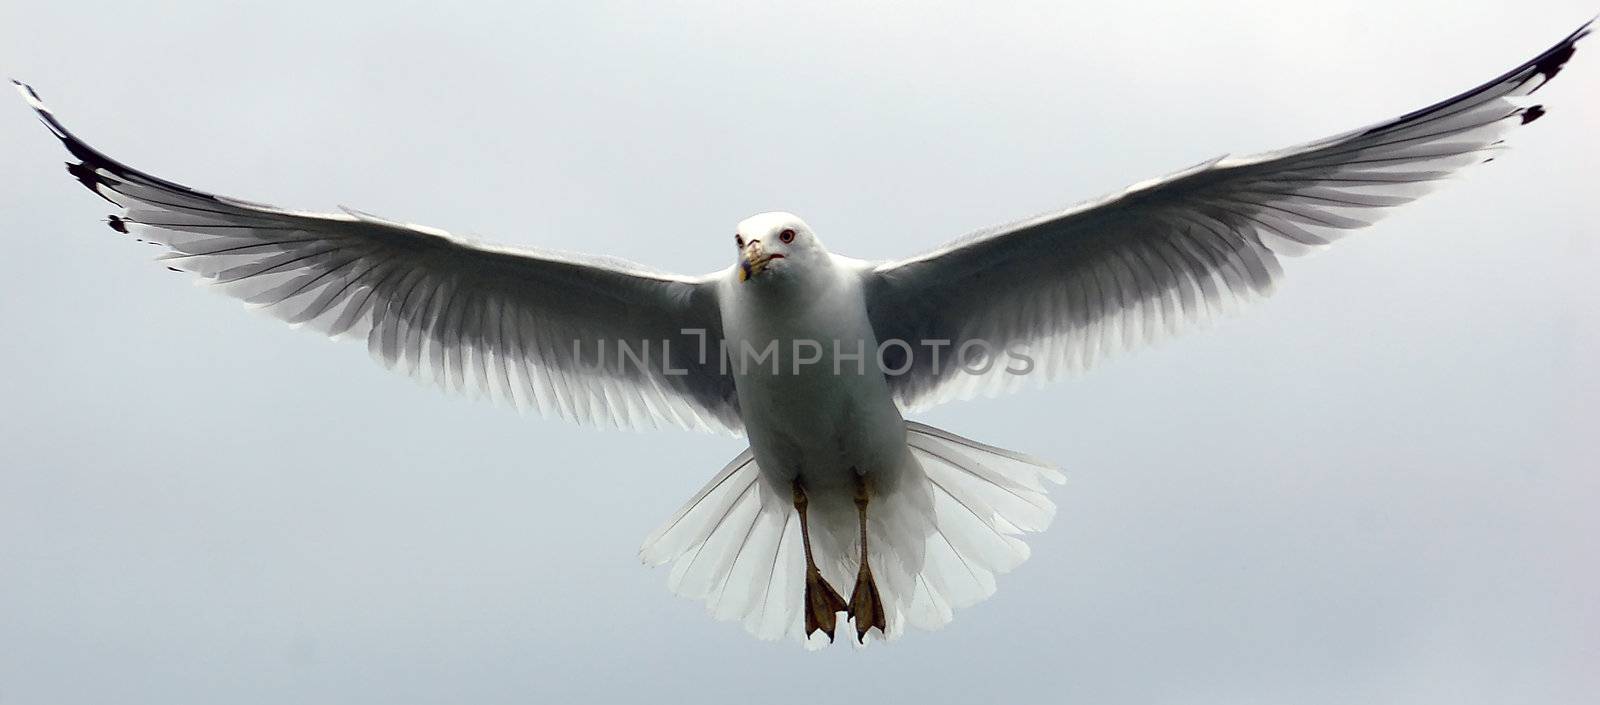 A picture of a seagull in flight against a white sky